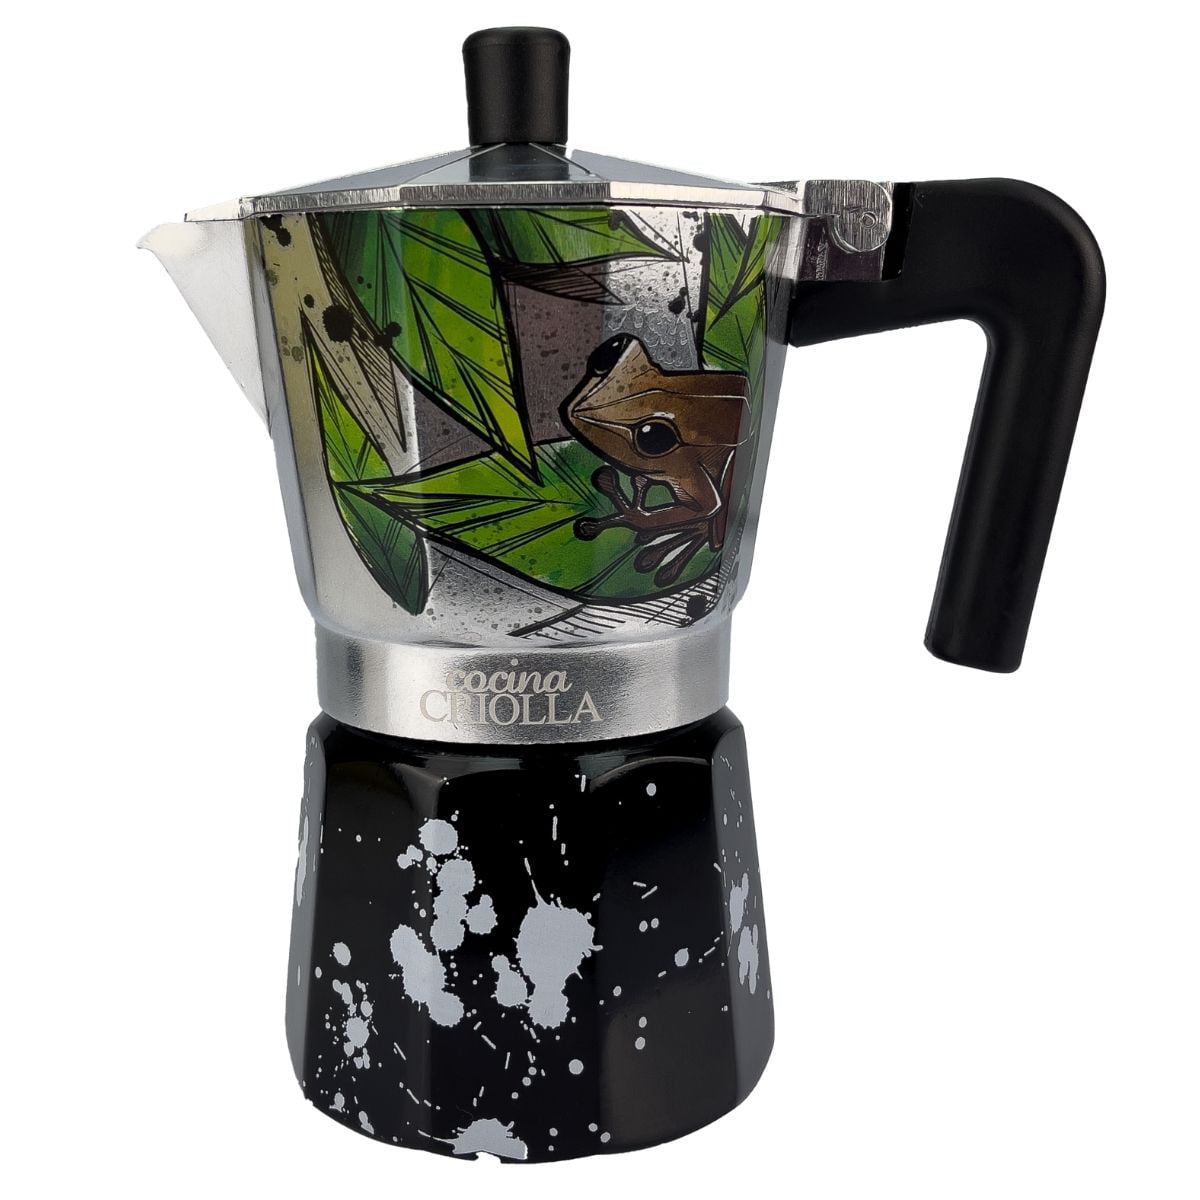 There is no such thing as too many Moka Pots. I live in Puerto Rico and we  call this “la greca”. This has been my favorite coffee brewing method since  forever. The